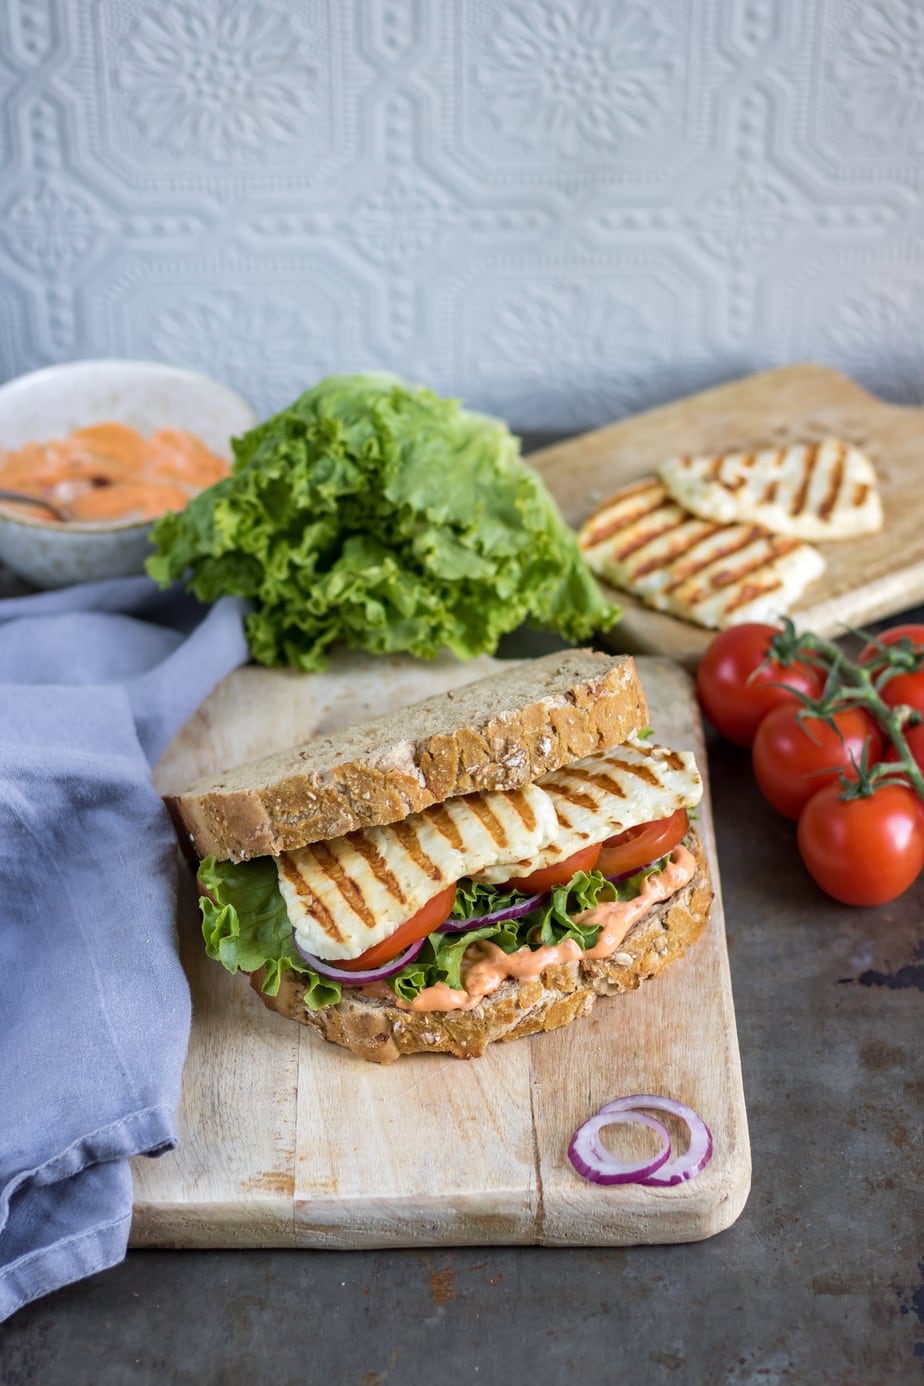 Table with a sandwich on a wooden board with lettuce, tomatoes and onion around it.